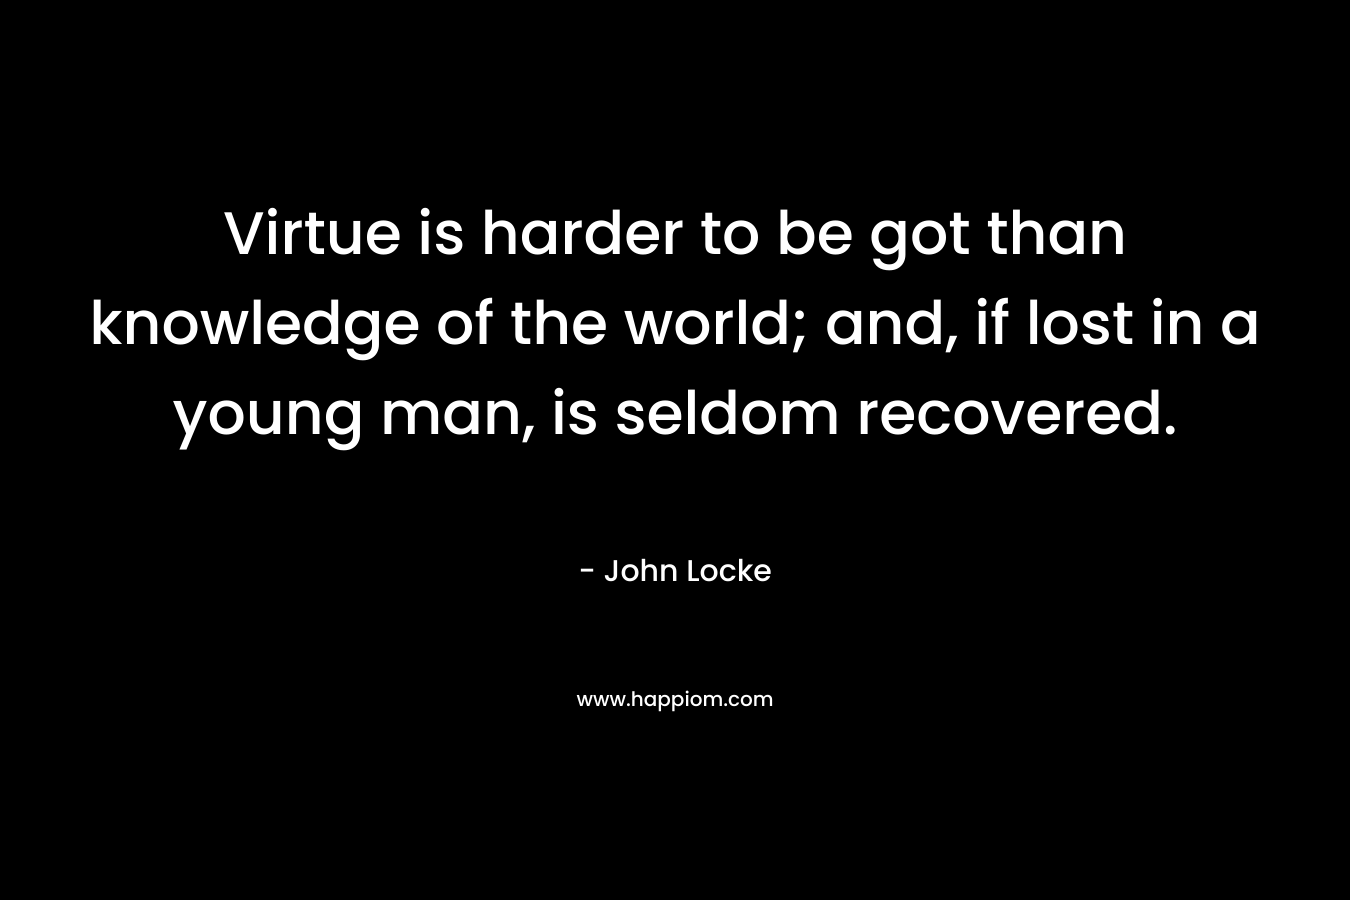 Virtue is harder to be got than knowledge of the world; and, if lost in a young man, is seldom recovered.